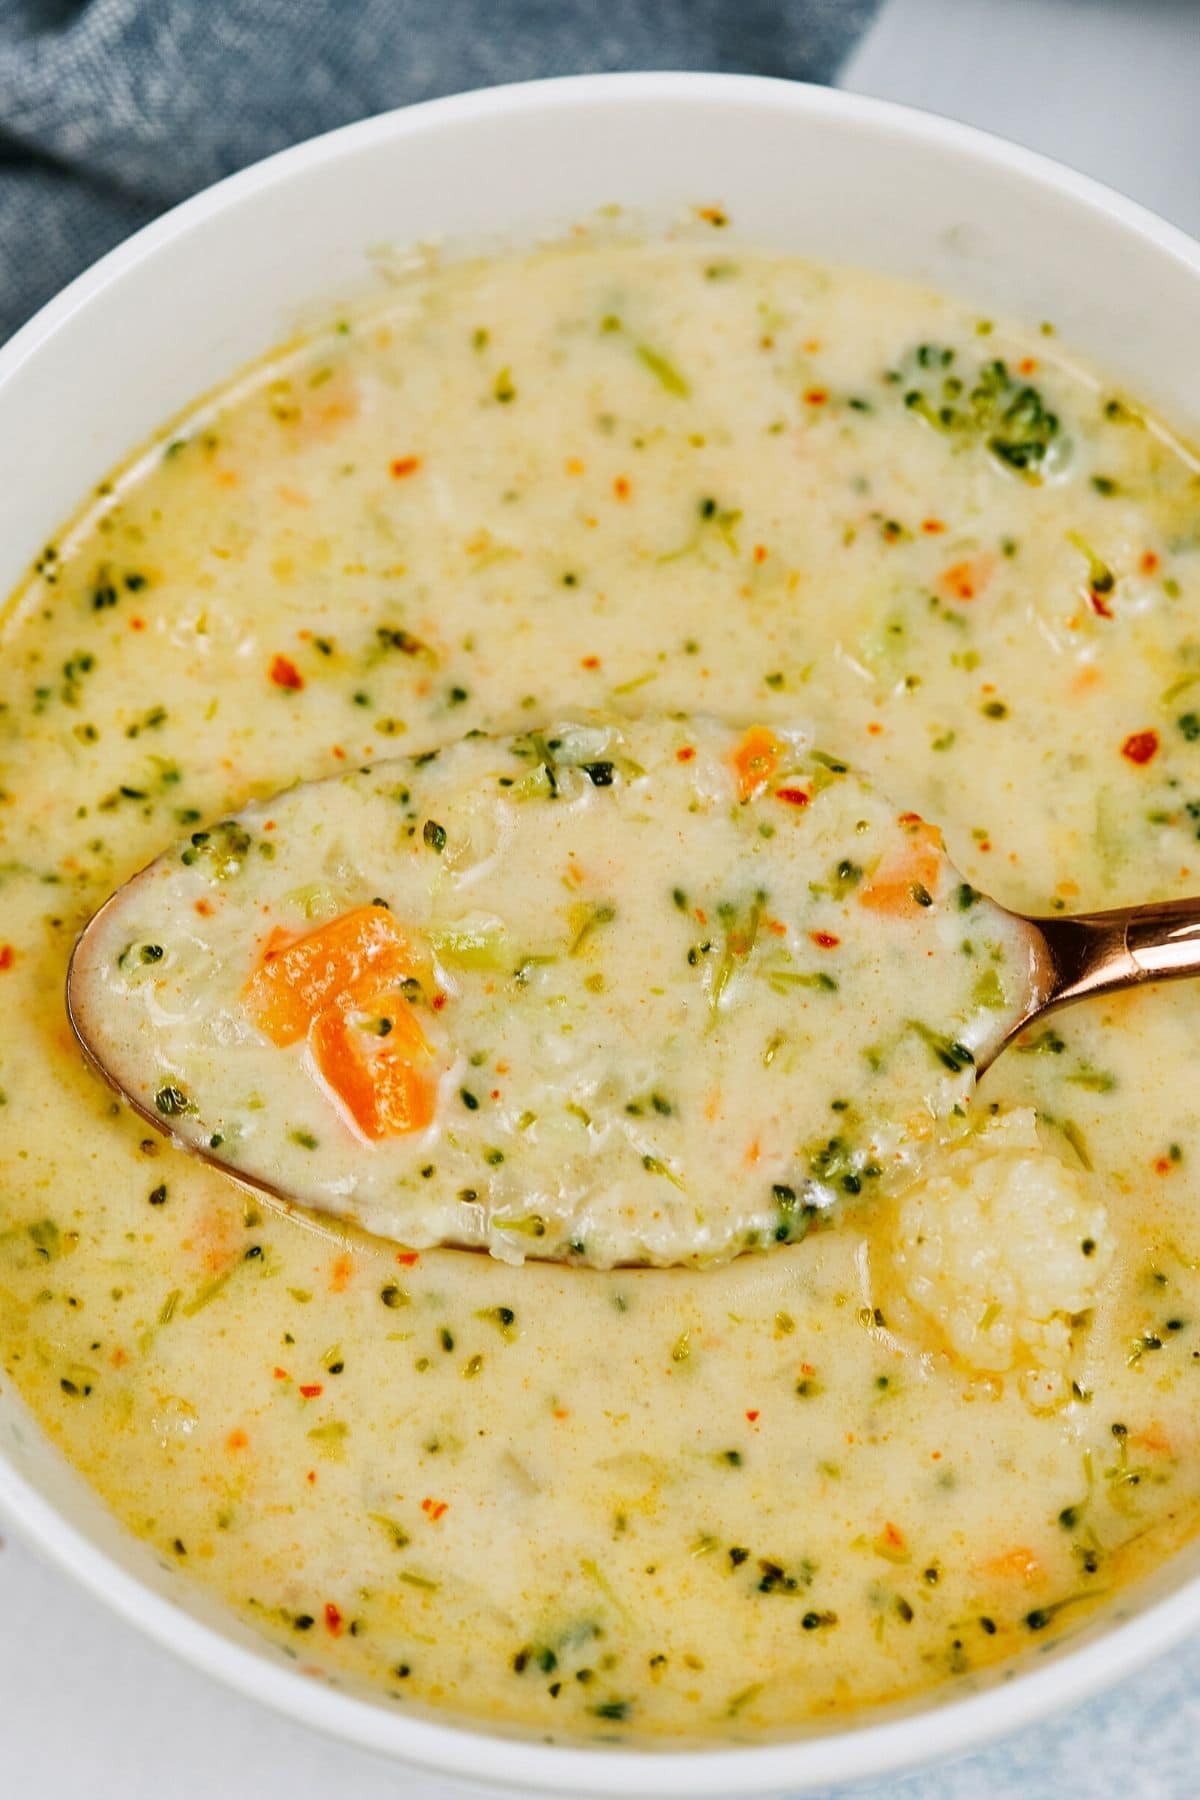 Close up image of spoon in bowl of cheese soup with broccoli and carrots